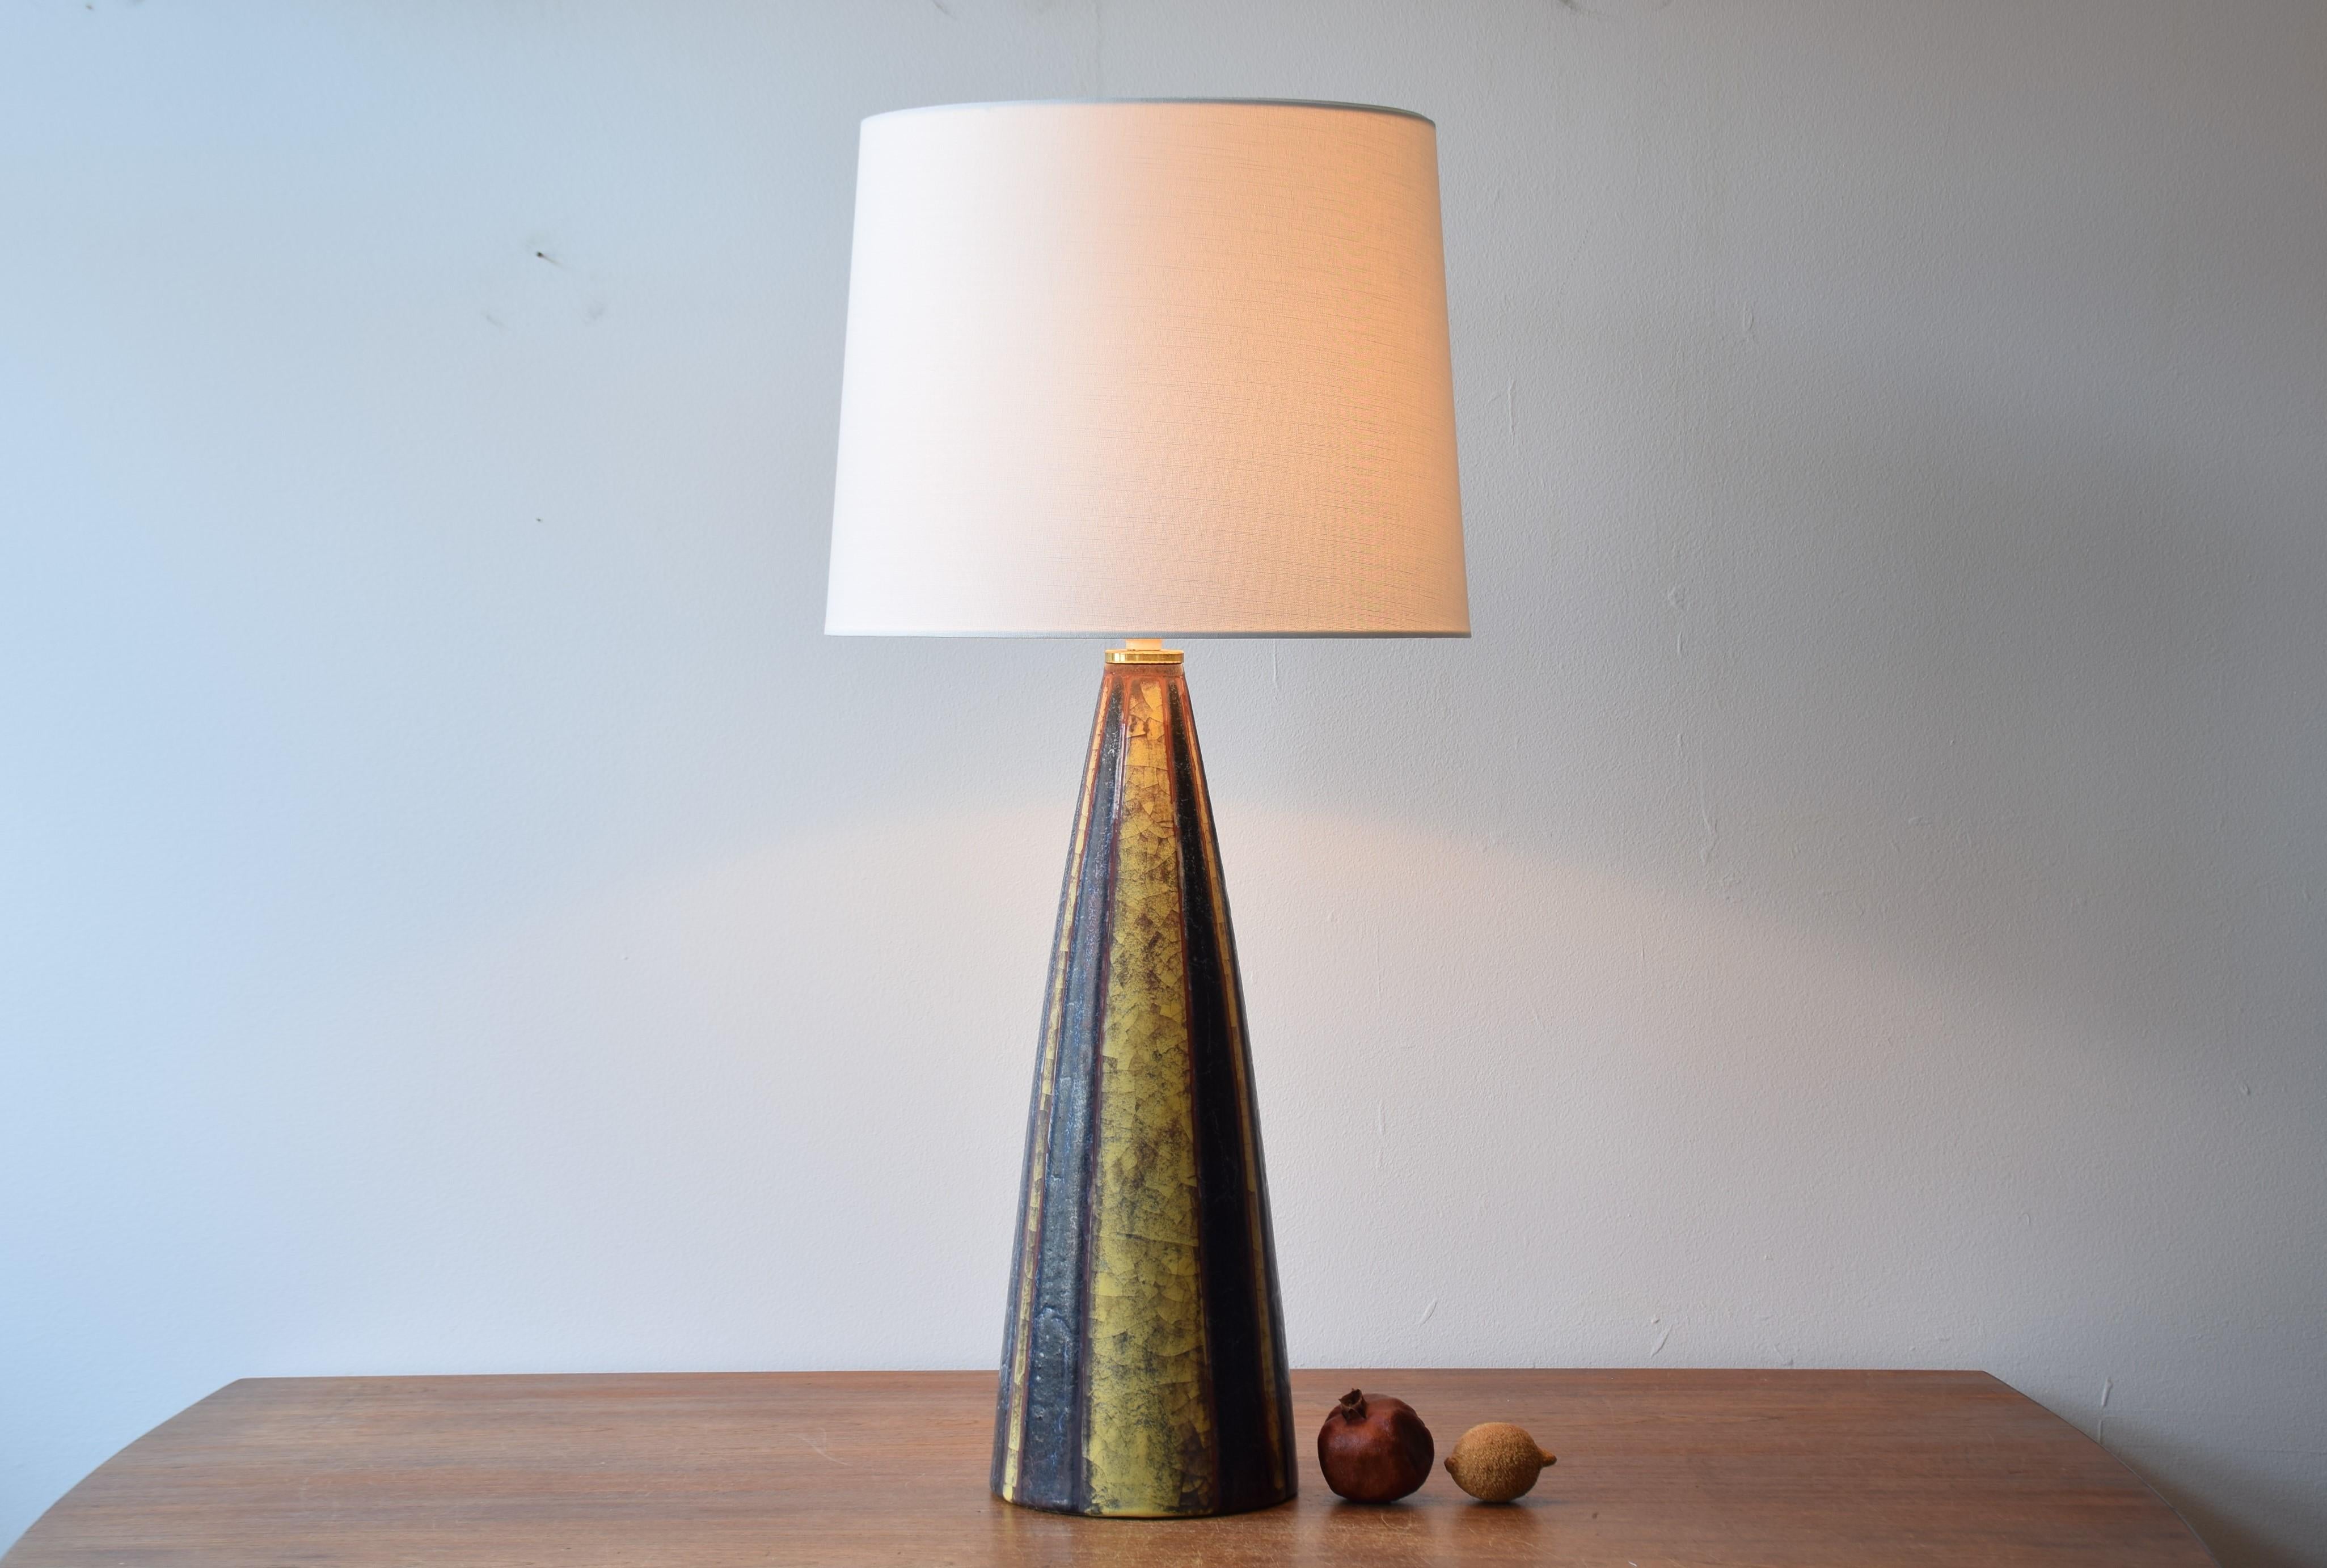 Stunning and very tall mid-century Danish table lamp from the ceramic workshop Michael Andersen & Søn on the Danish island Bornholm. Made ca 1960s. This lamp can also be used as a floor lamp.
The lamp is most likely a one-of-a-kind piece.

The